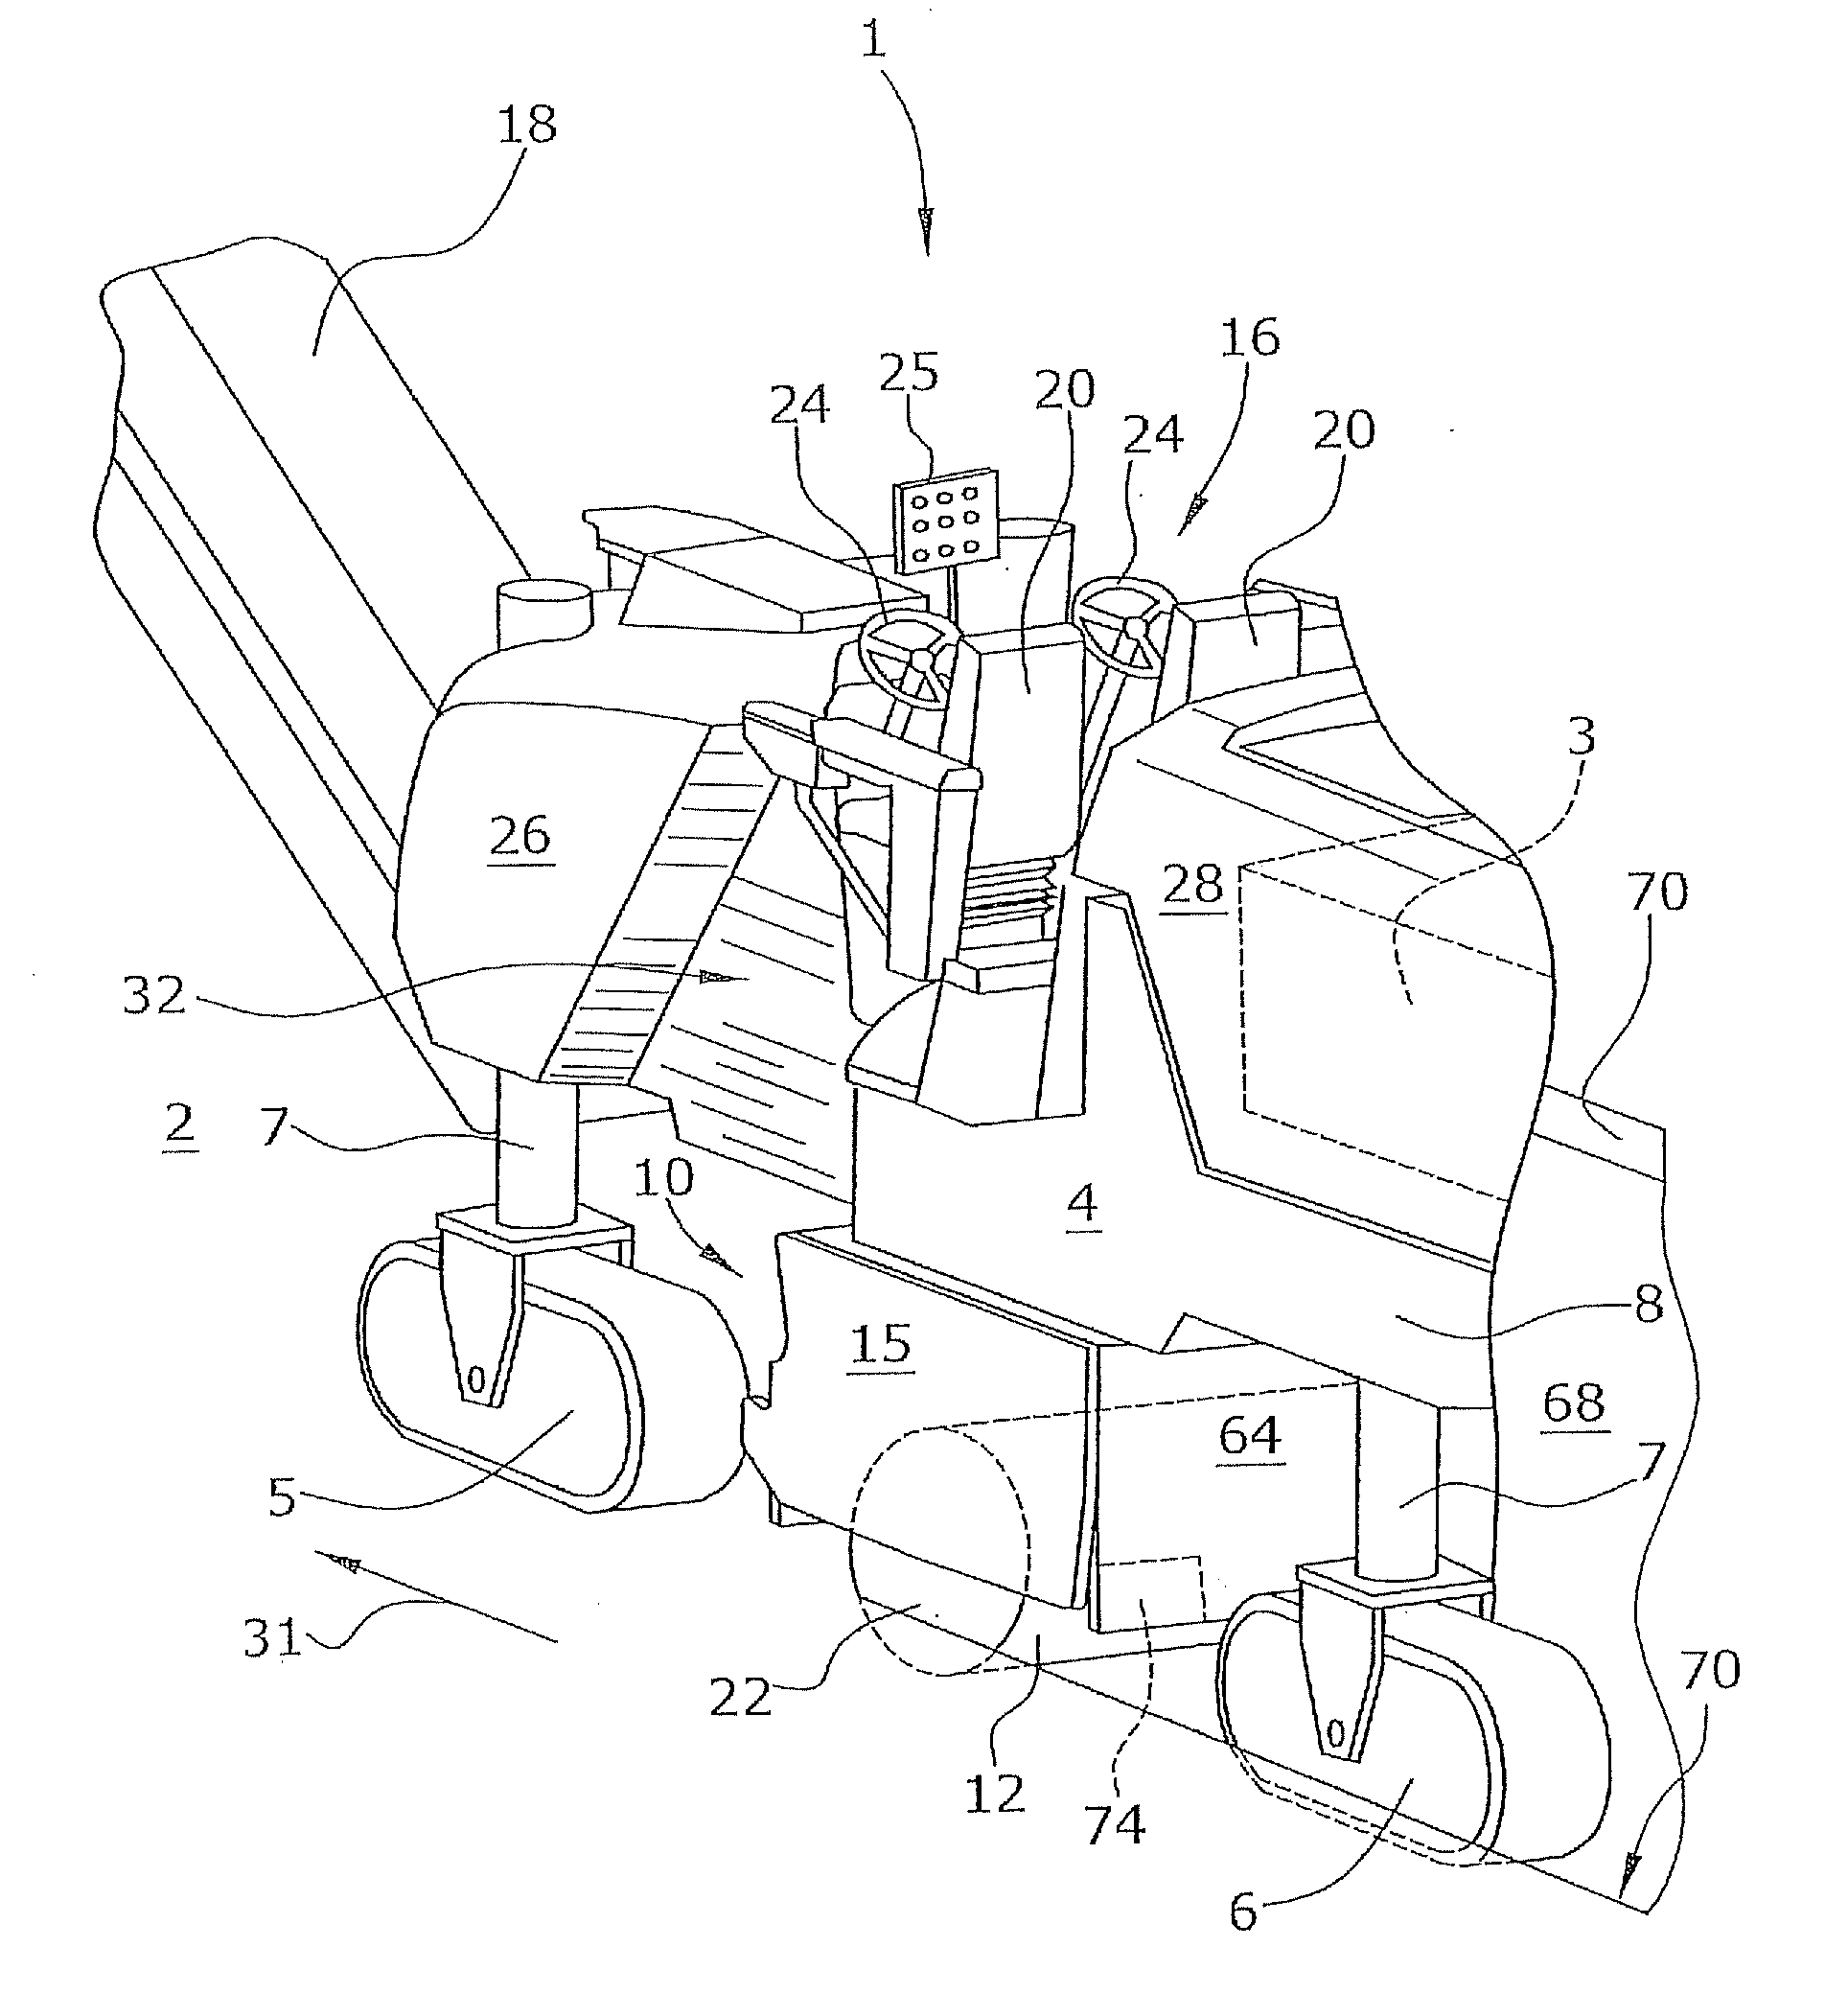 Self-Propelled Road Milling Machine For Milling Road Surfaces, In Particular Large-Scale Milling Machine, And Method For Milling Road Surfaces